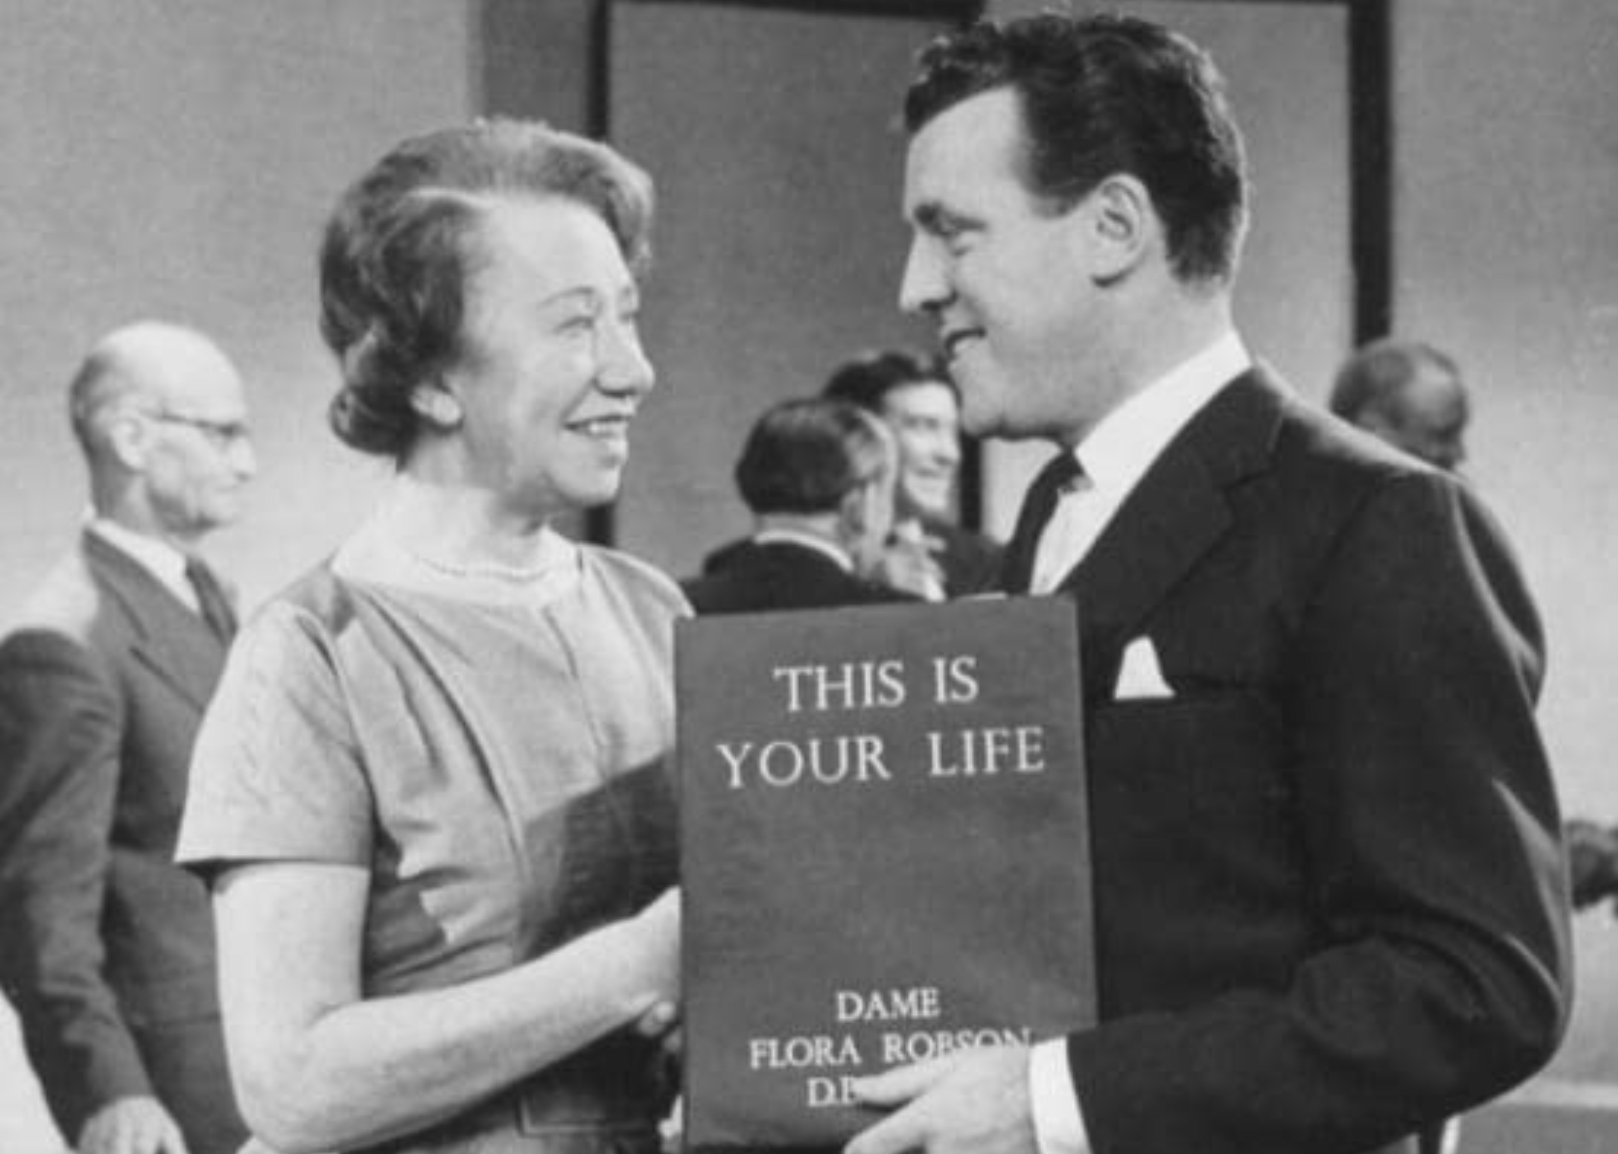 Eamonn Andrews and Flora Robson in "This Is Your Life".